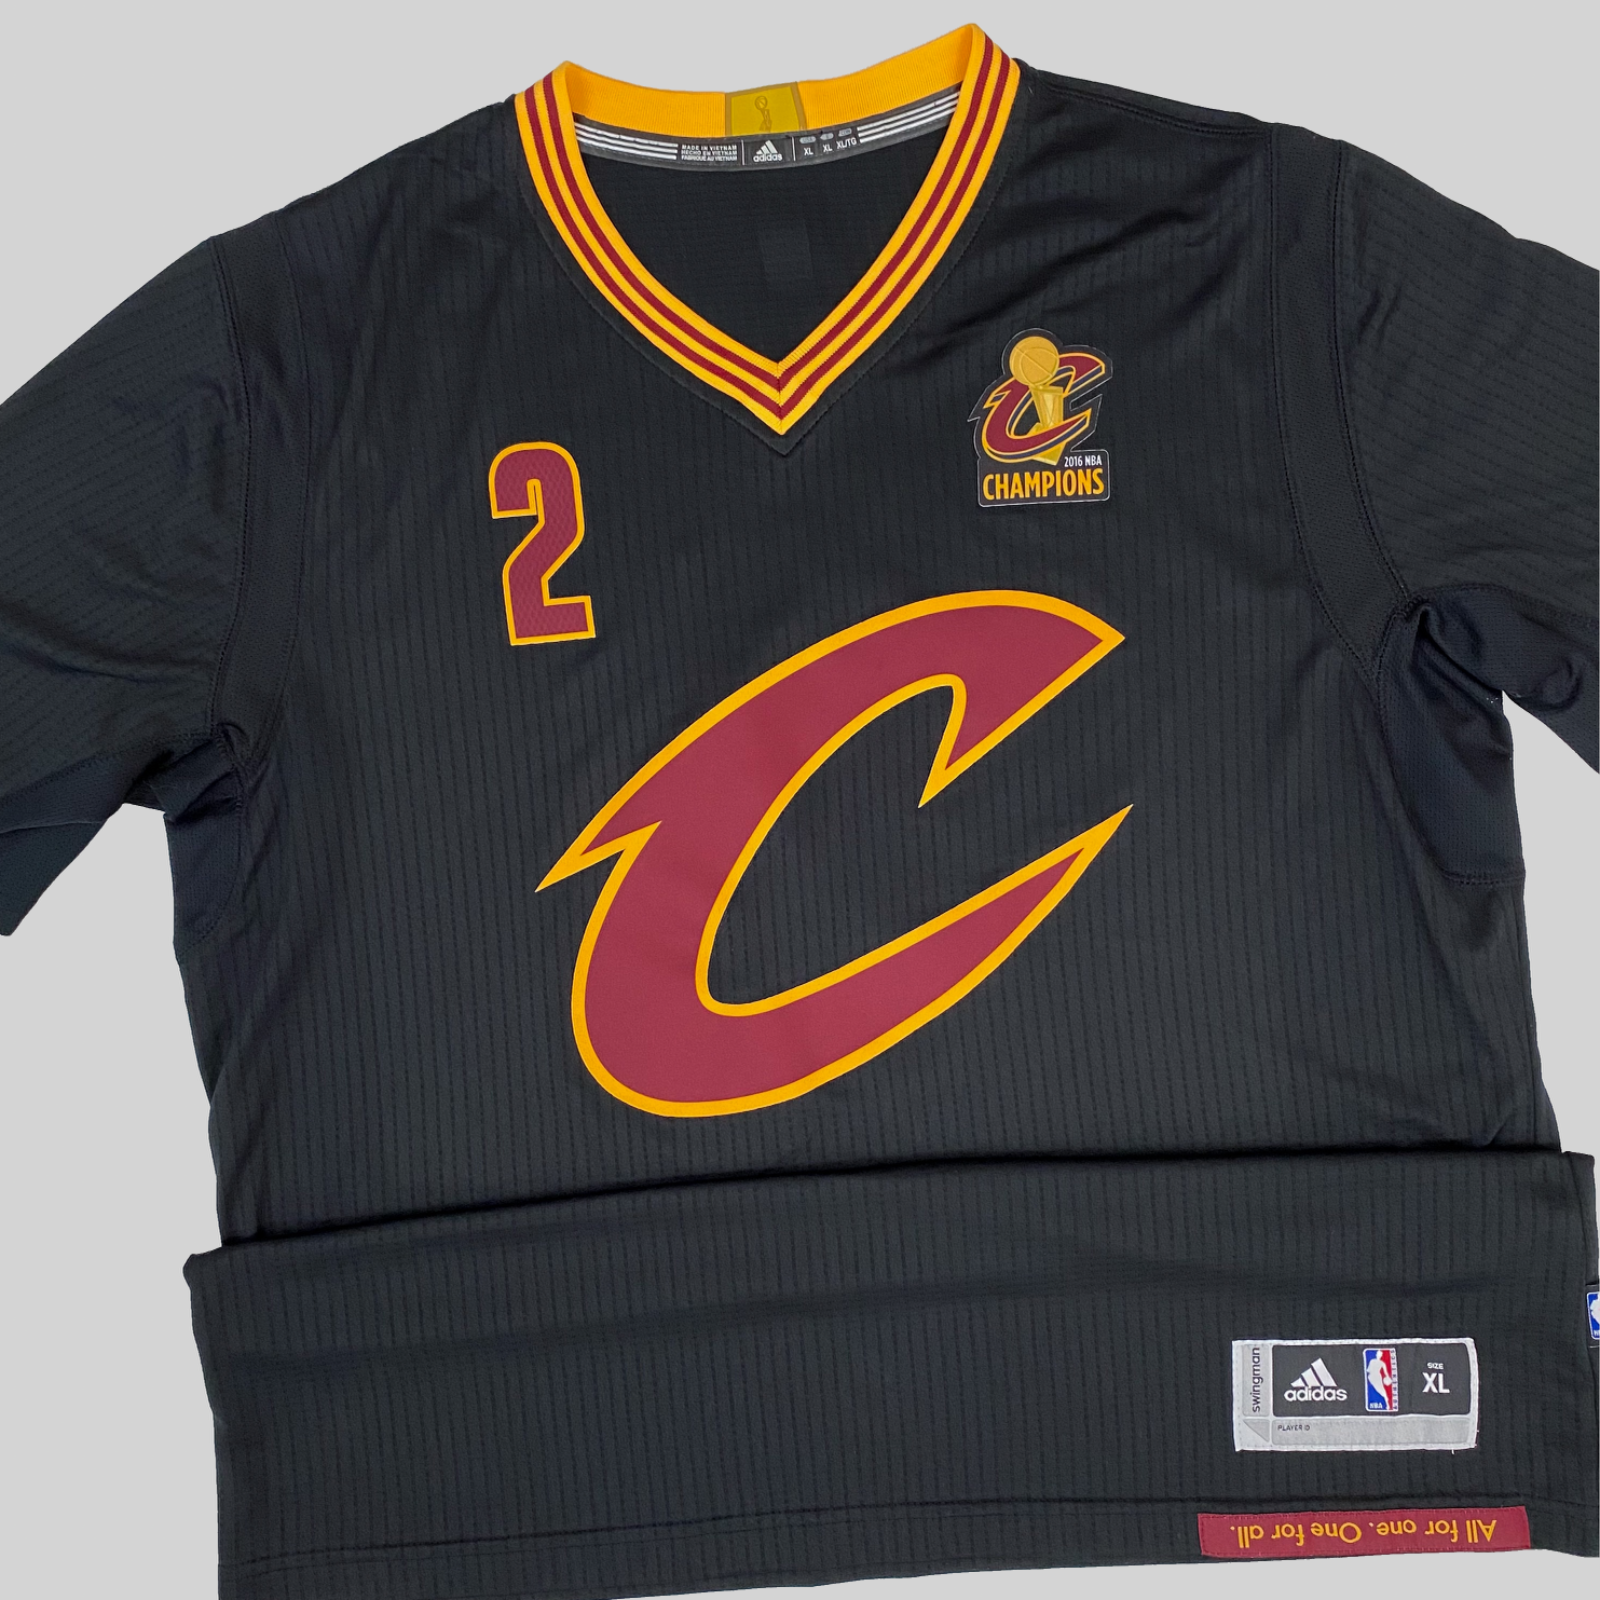 kyrie irving sleeve jersey